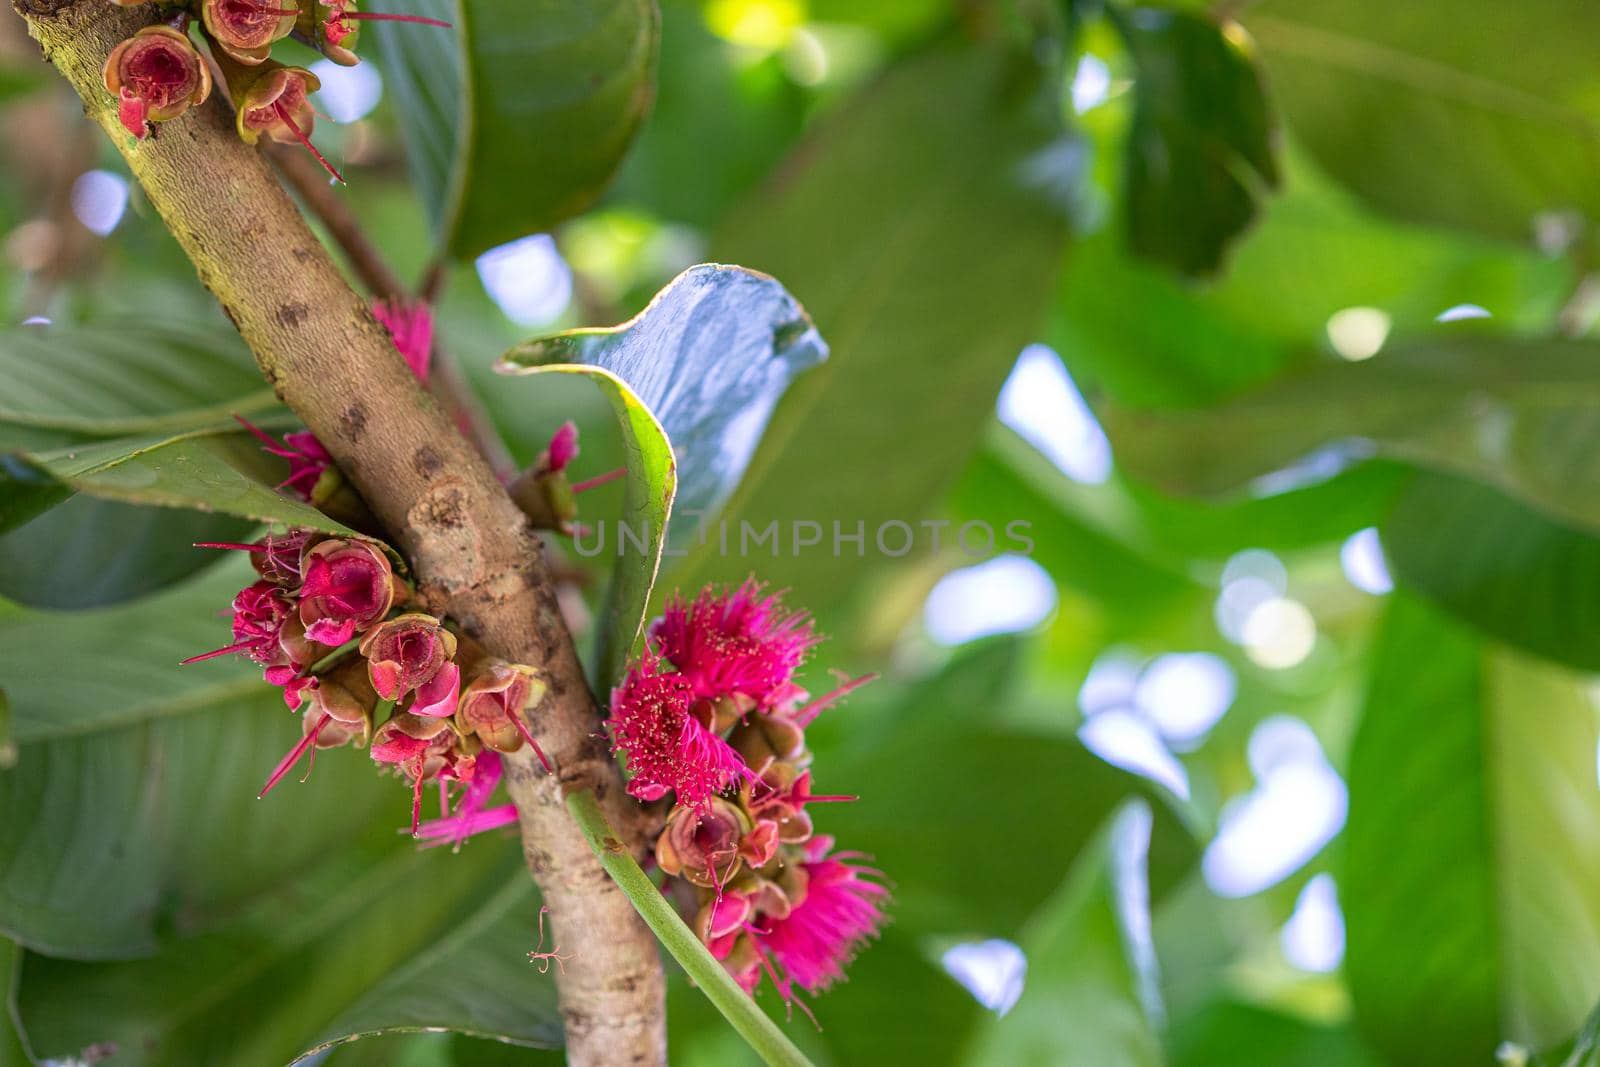 Malay apple, Malay rose apple flower on tree in the garden by domonite